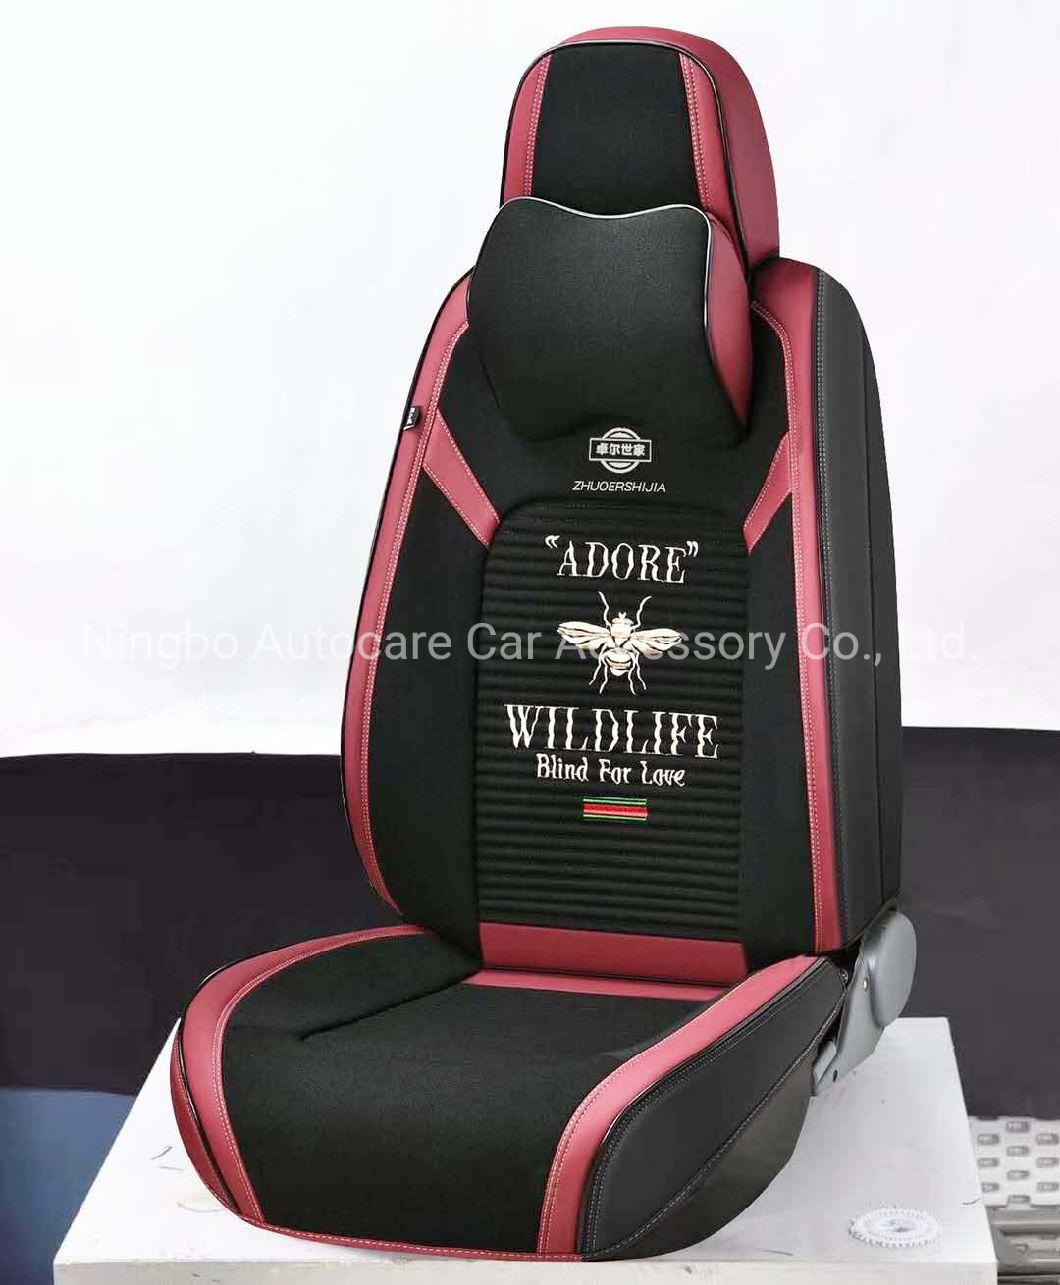 Car Accessories Car Decoration Car Seat Cushion Full Covered Leather 9d Car Seat Cover